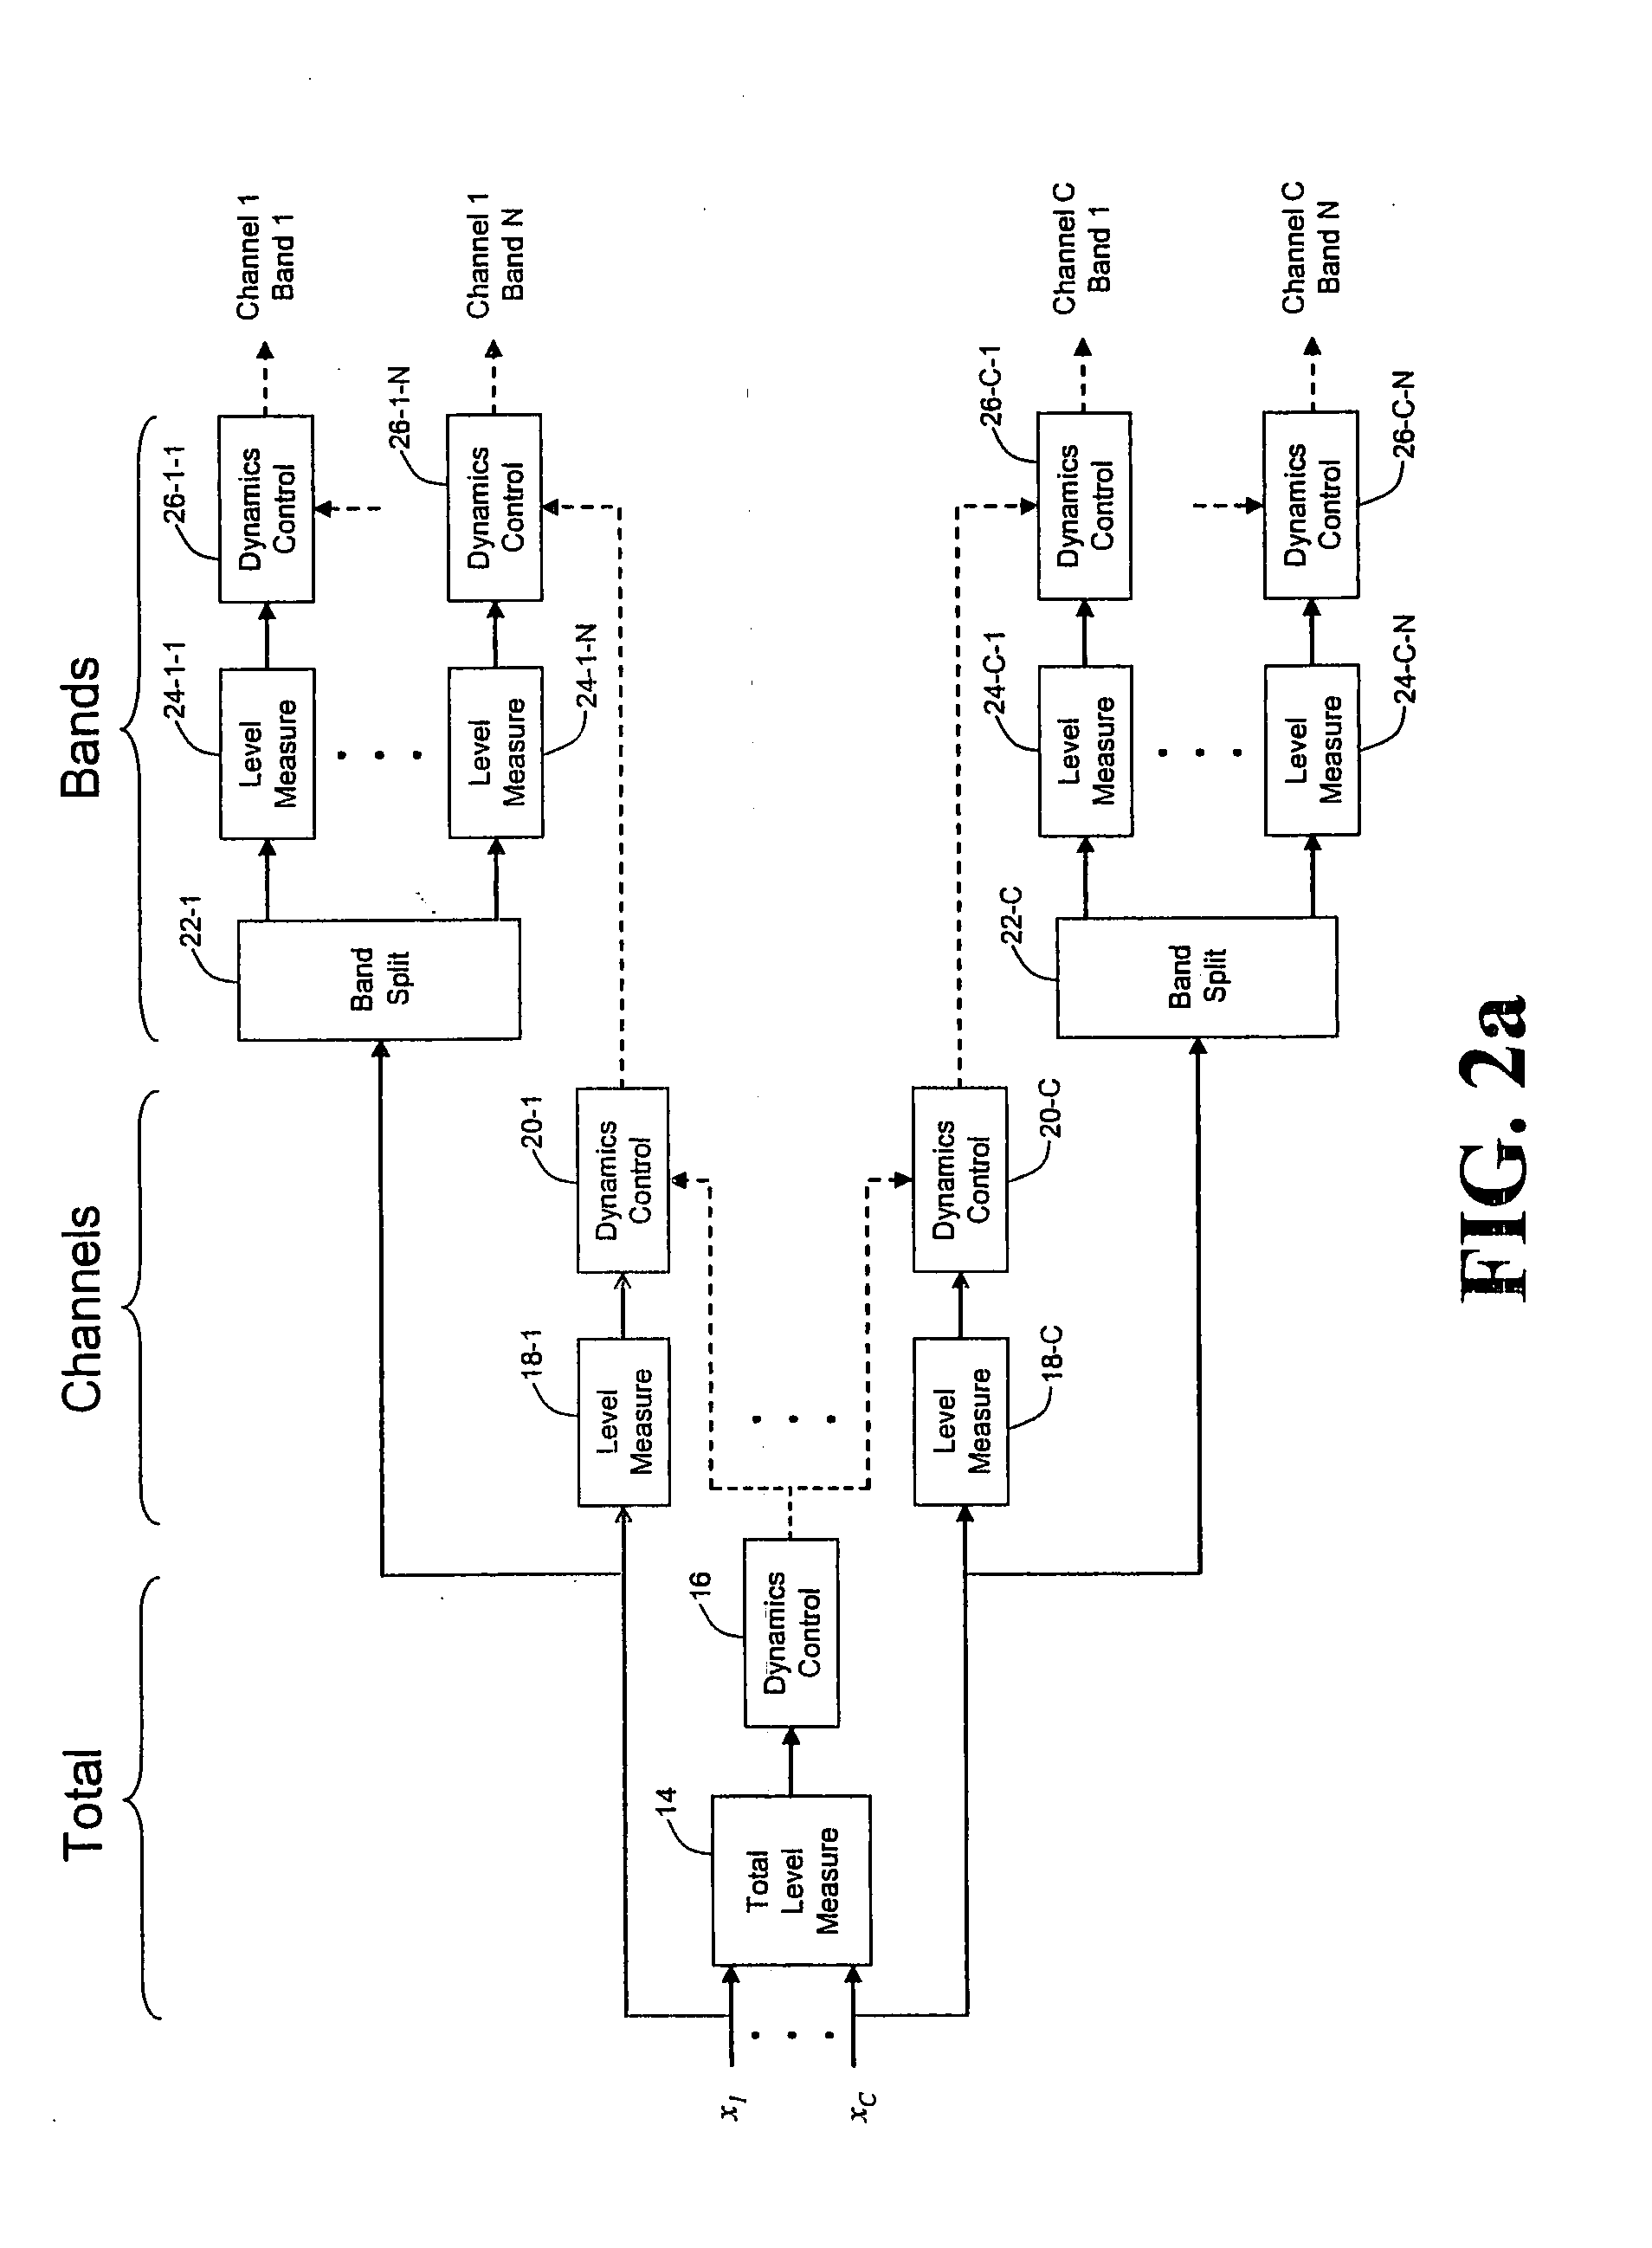 Hierarchical Control Path With Constraints for Audio Dynamics Processing